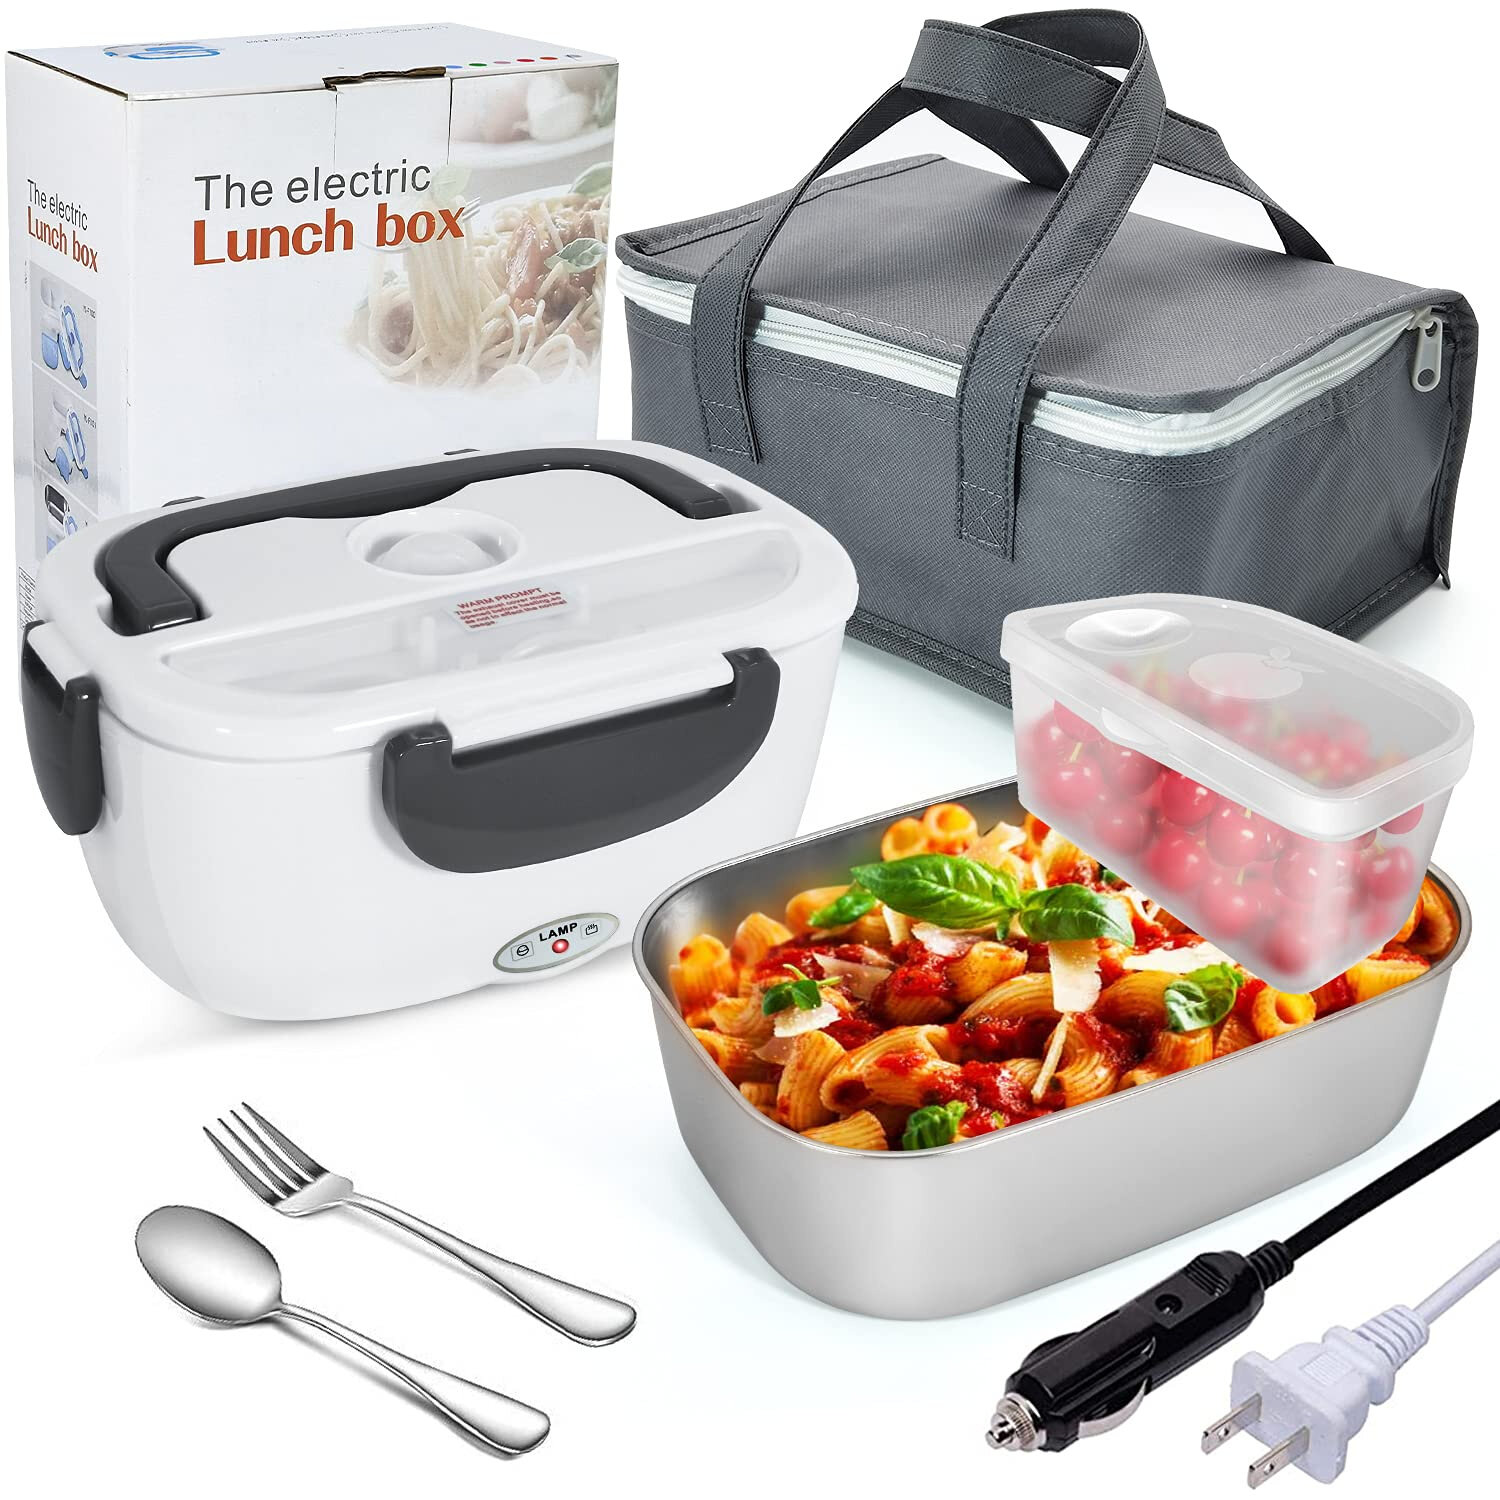 1.5L 12V Portable Car Electric Heating Lunch Box Bento Food Warmer Parts 